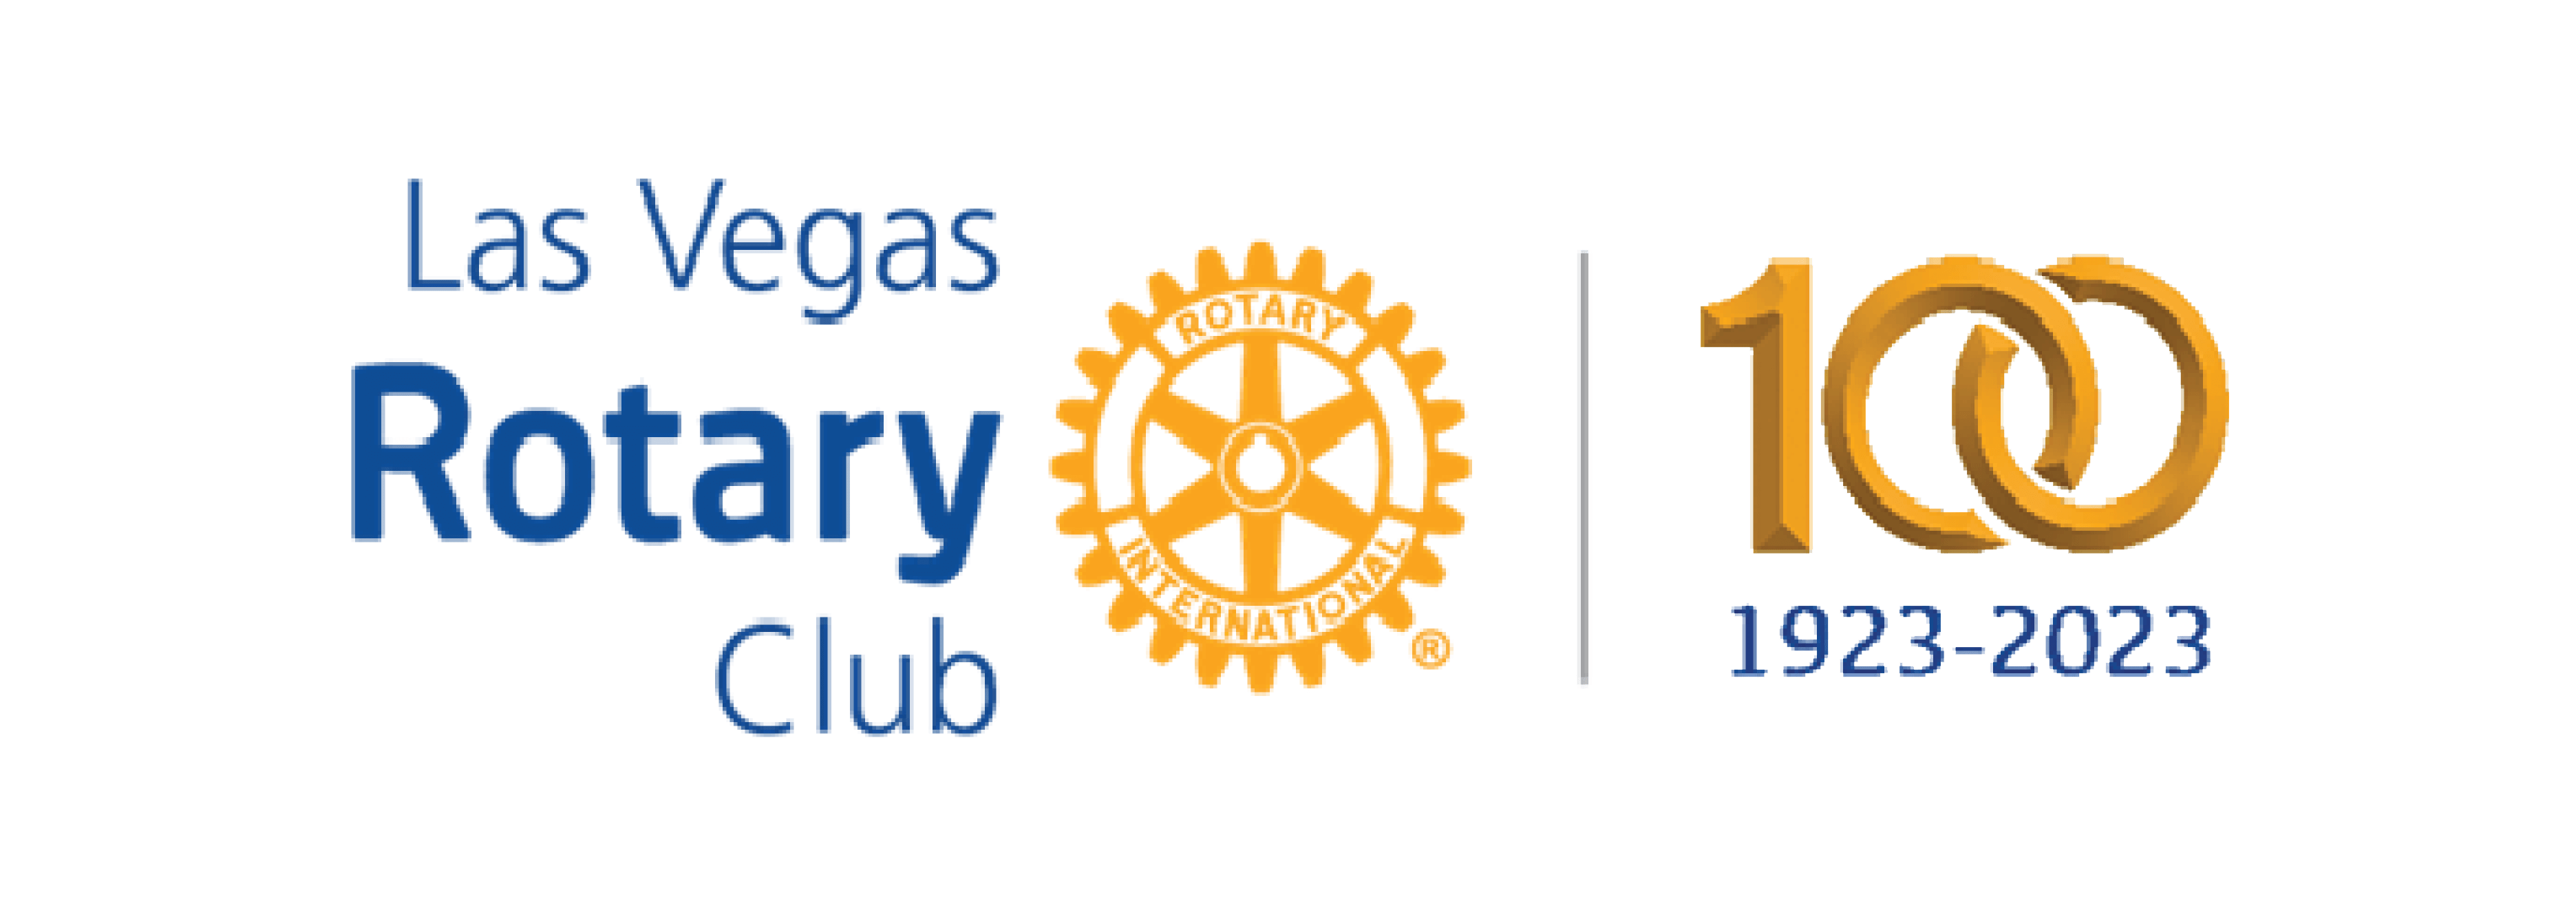 rotary logo png